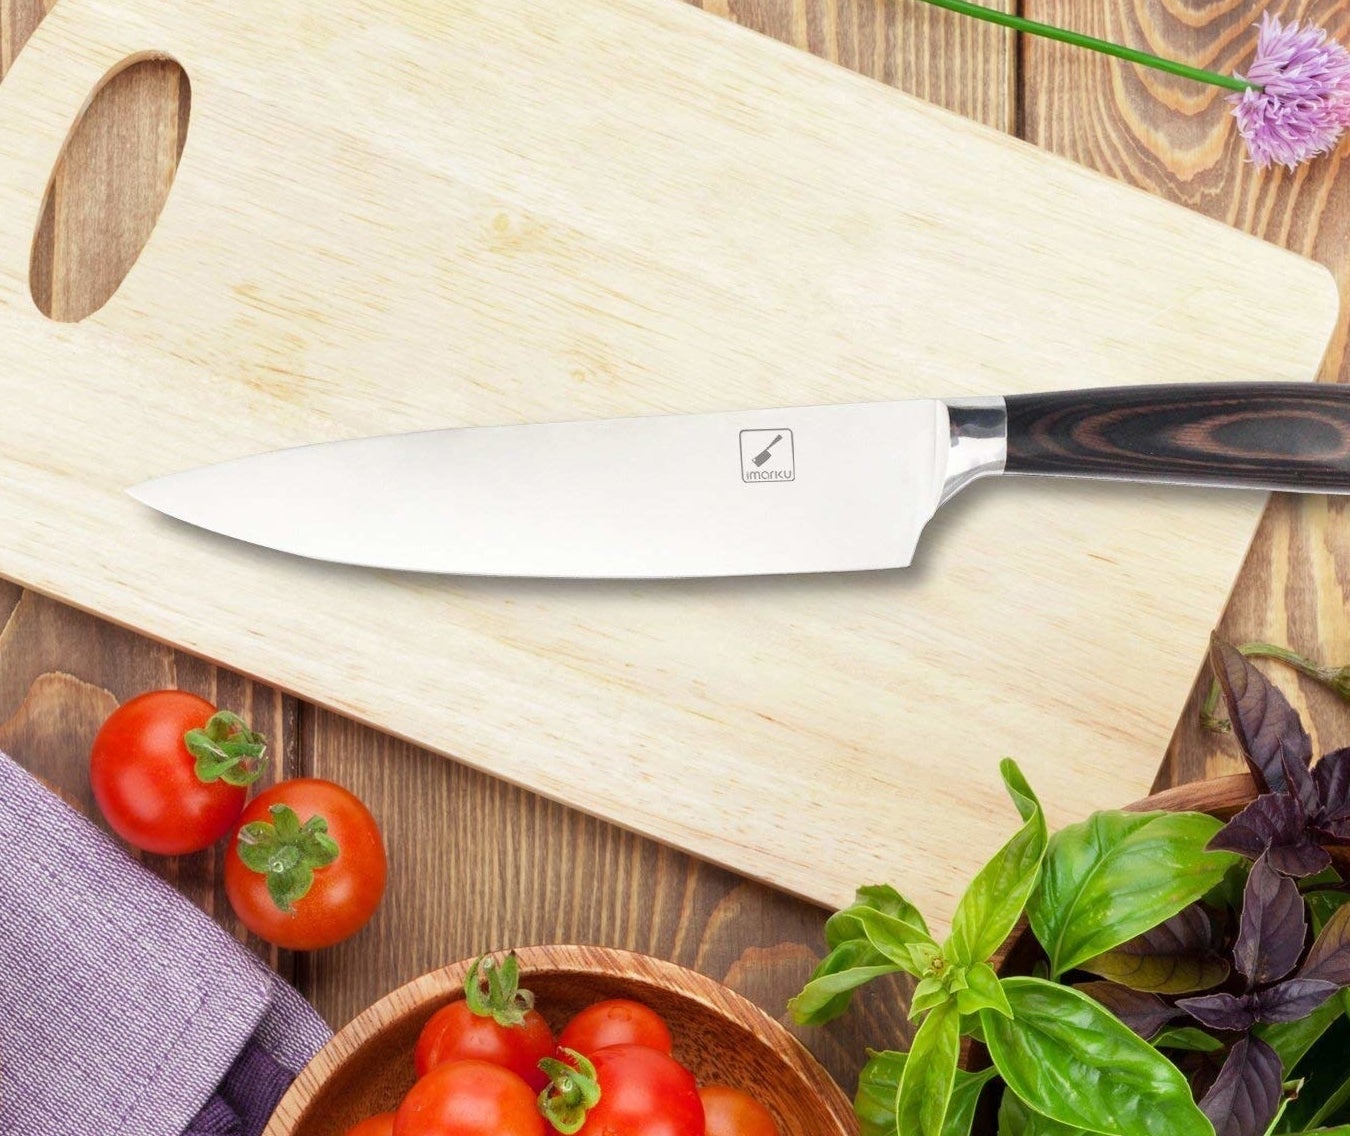 knife with wood grain handle on cutting board